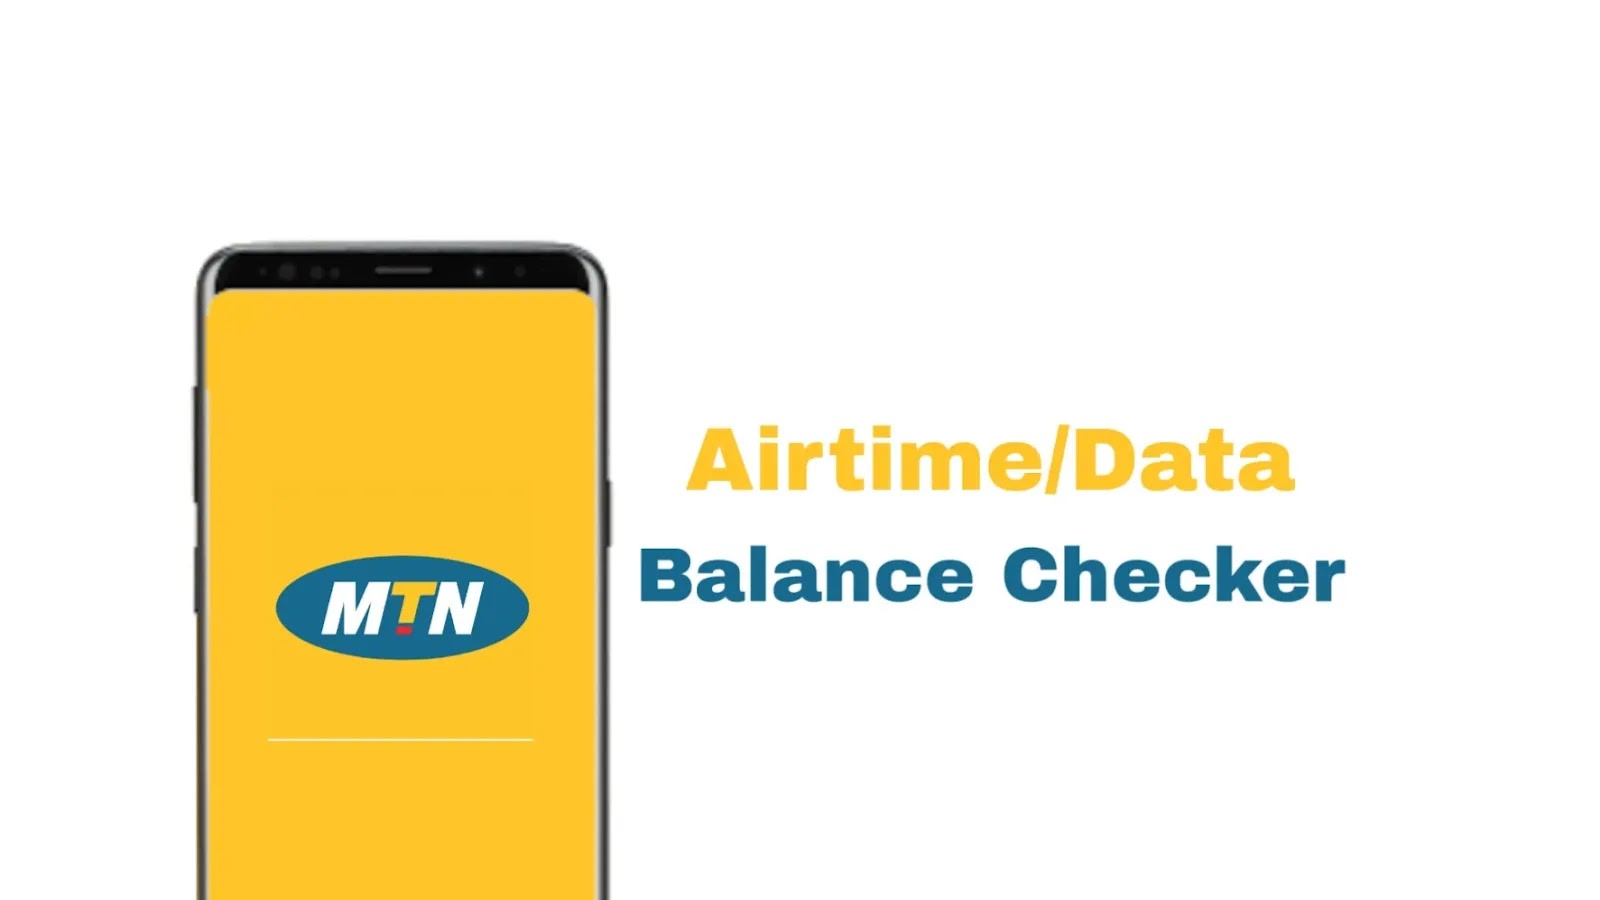 In 4 Easy Steps, Check Your MTN Airtime and Data Balance